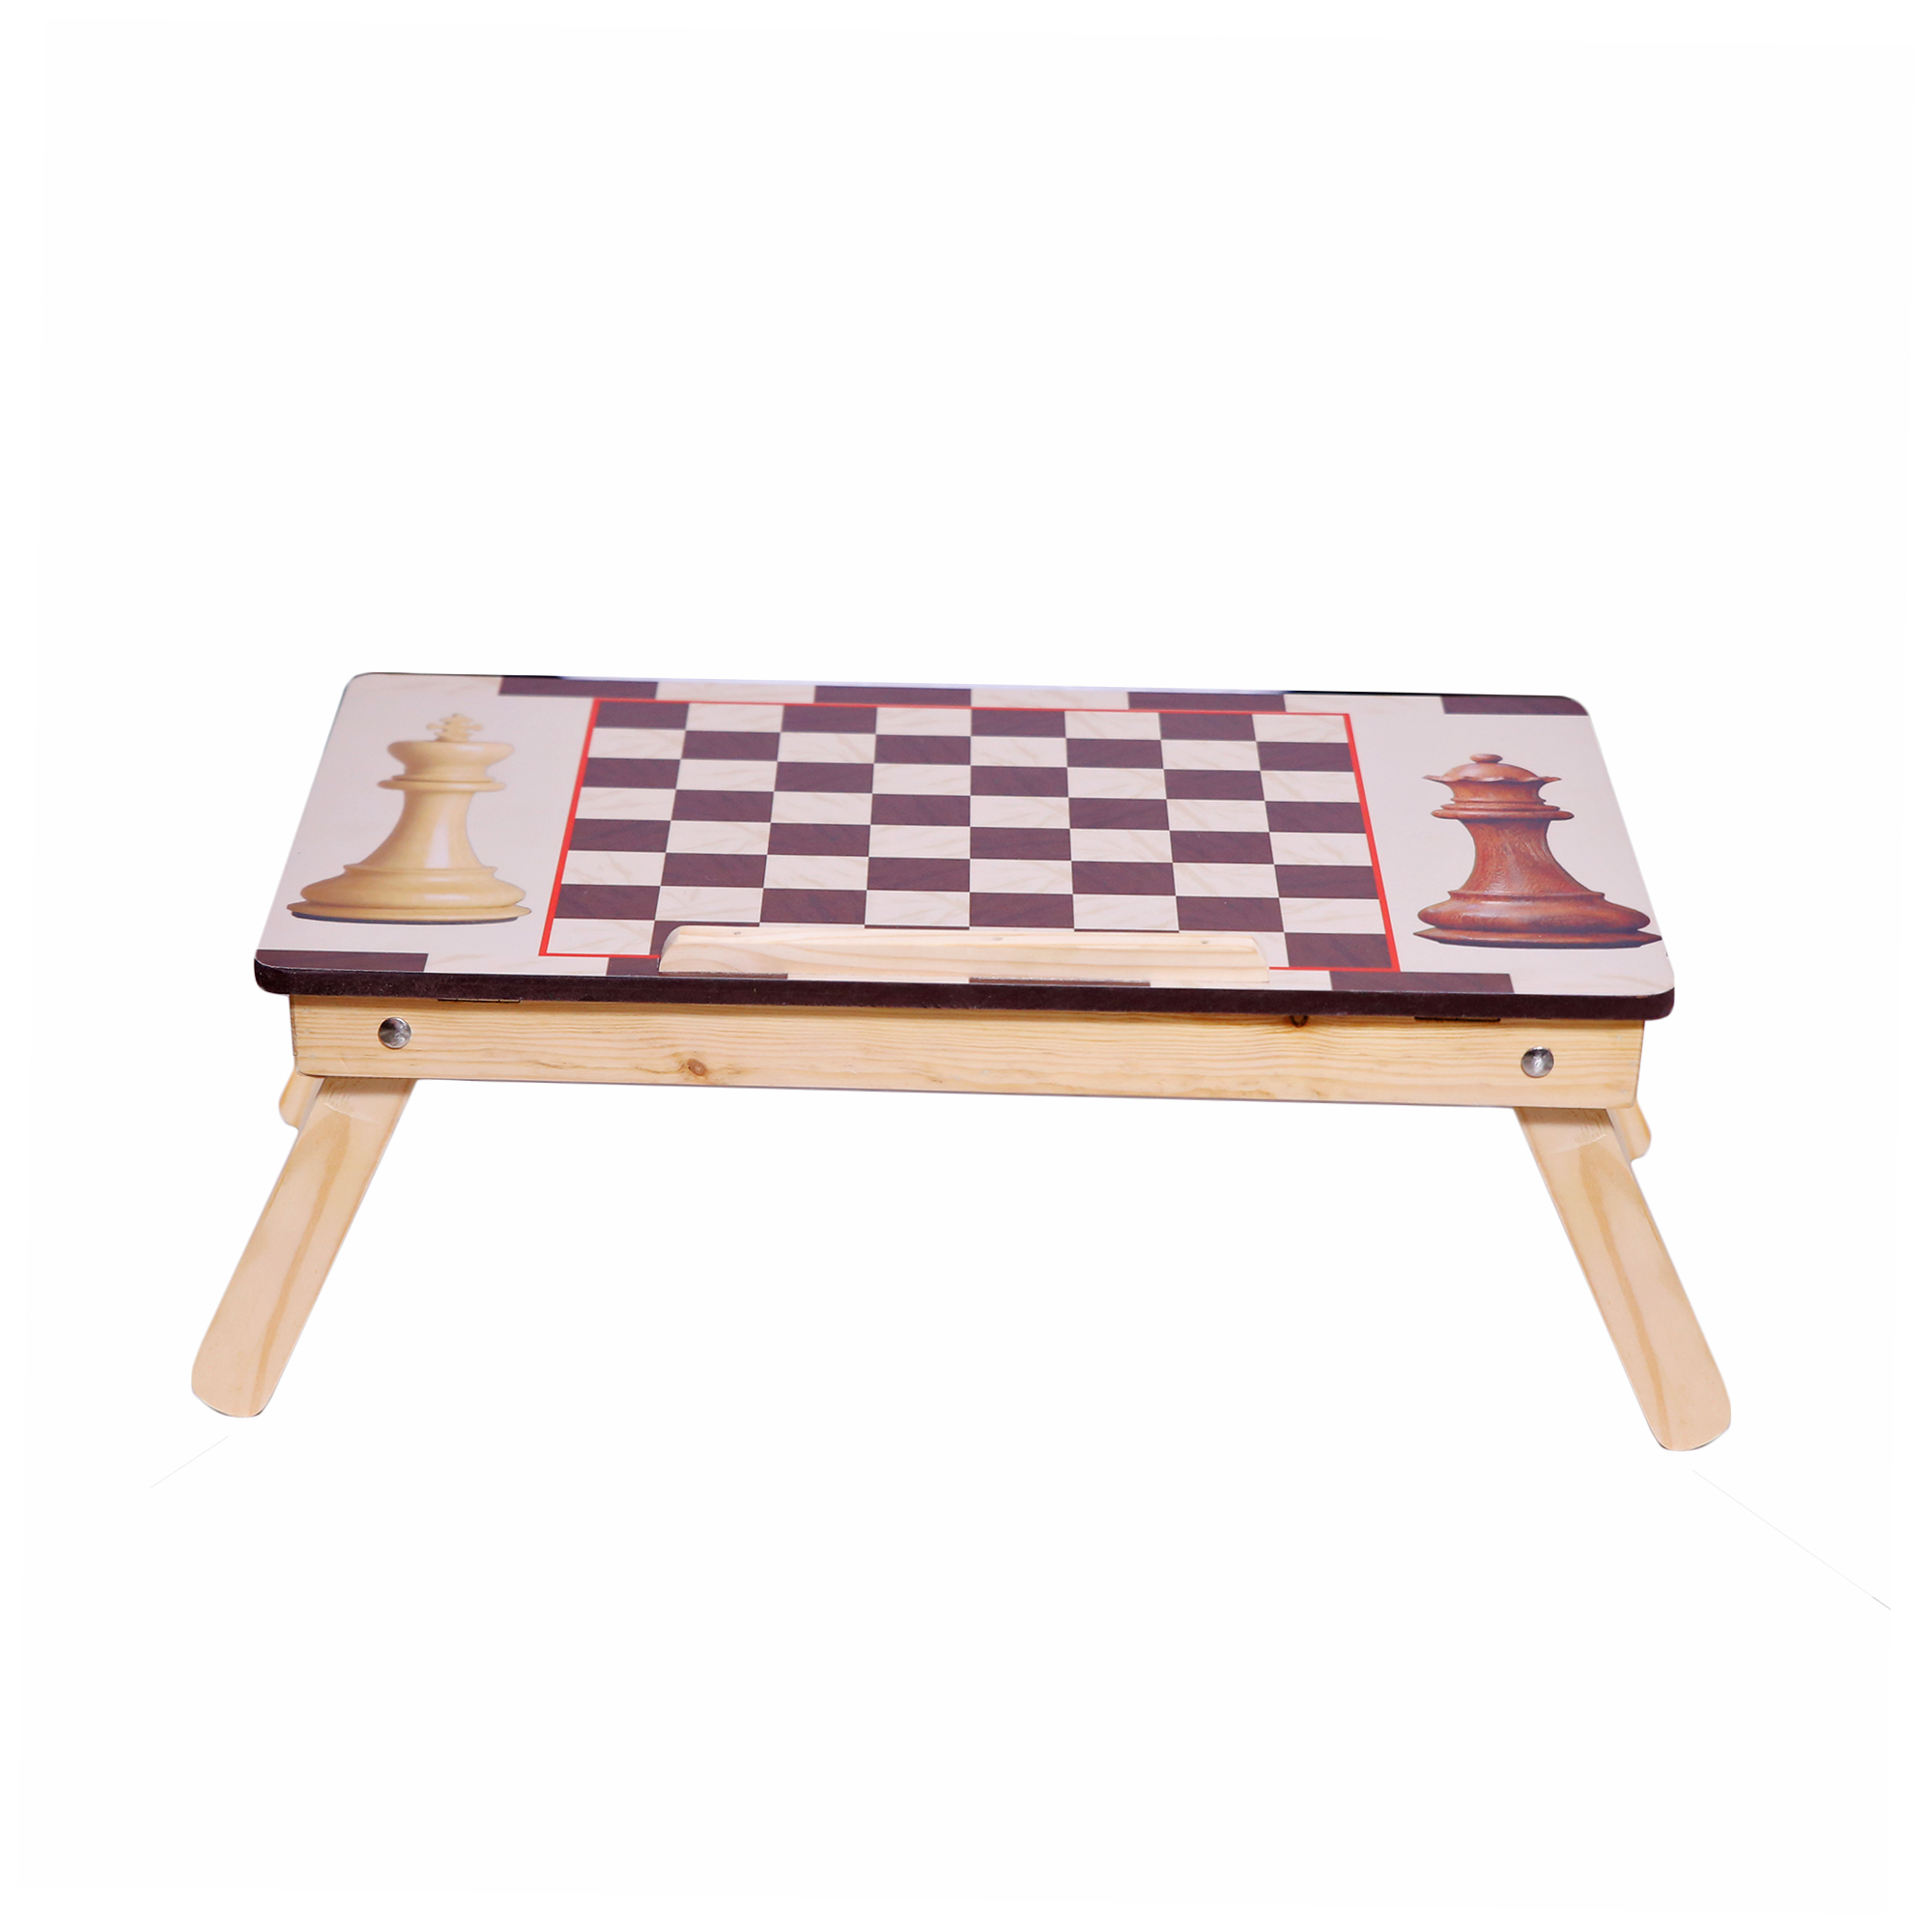 Chess design wooden laptop table